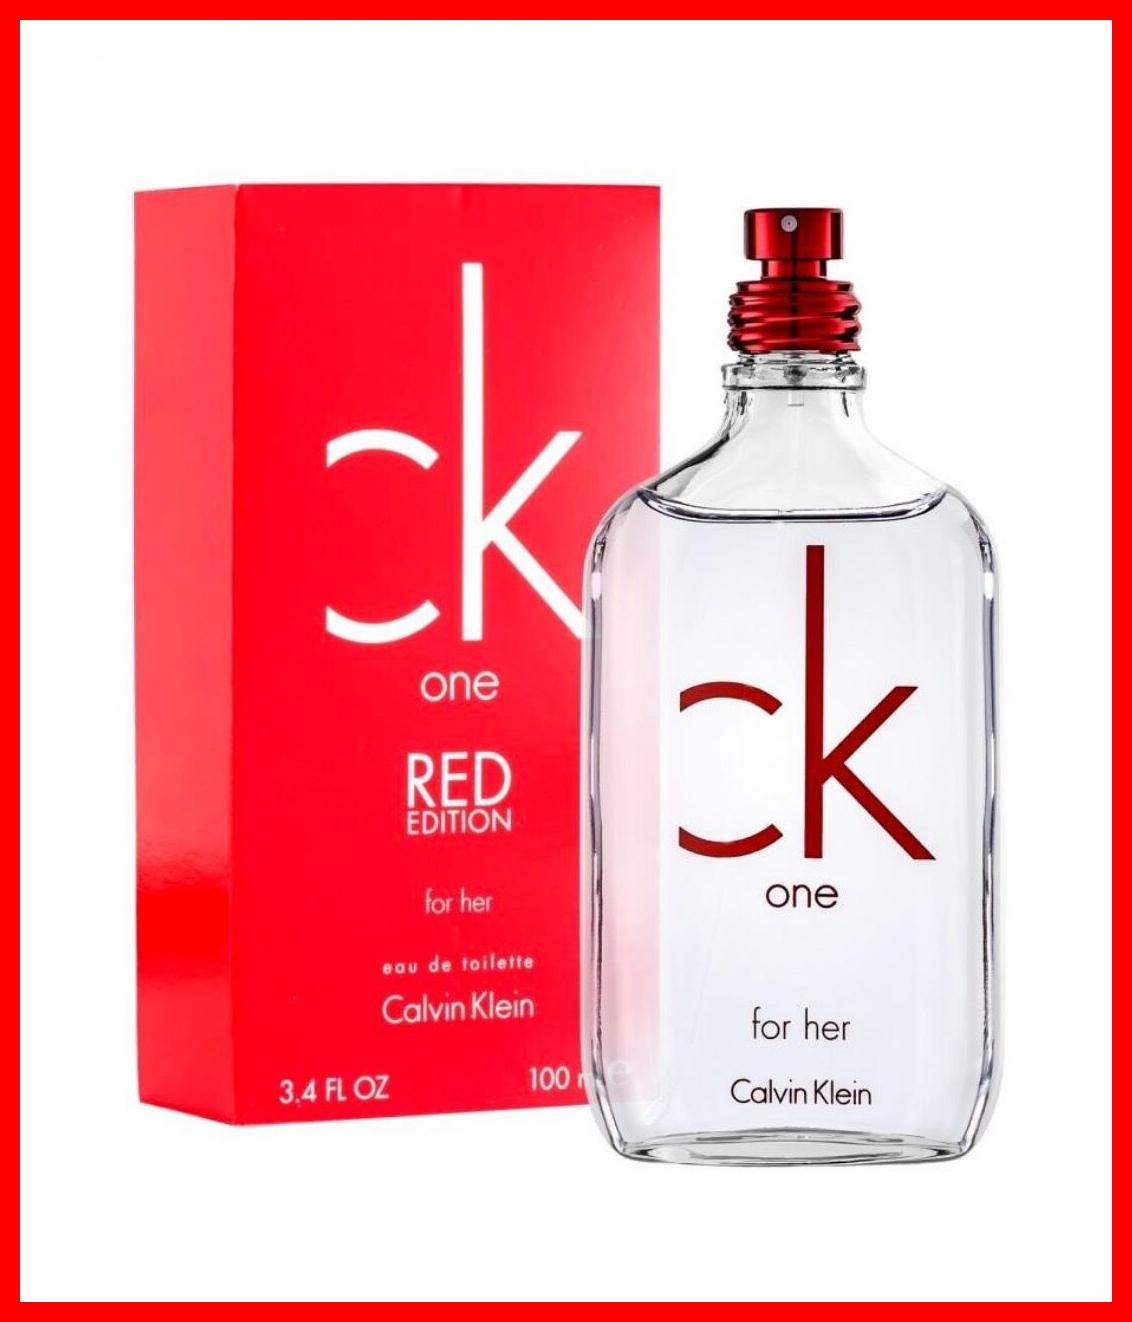 CALVIN KLEIN CK One Red Edition 100mL Eau de Toilette from France 100%  Original (NOT TESTER!) Perfume for Women Sealed Box | Lazada PH